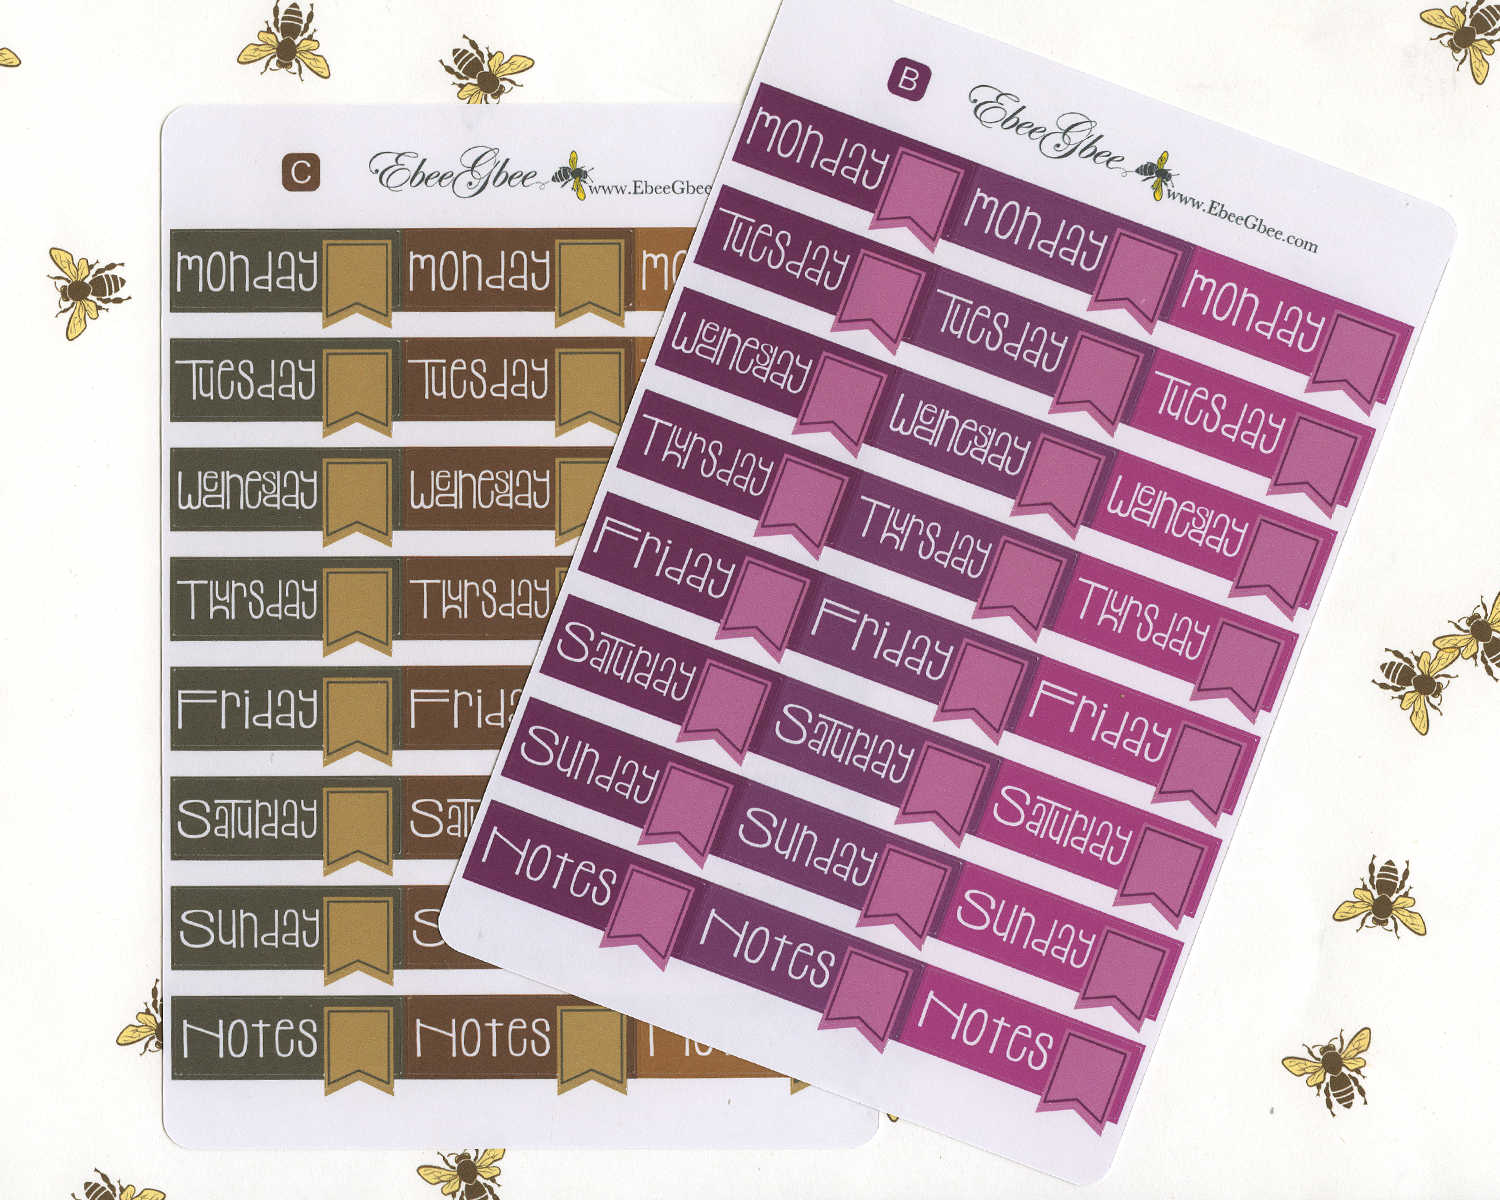 FLAG DATE COVERS Planner Stickers | All Colors Available